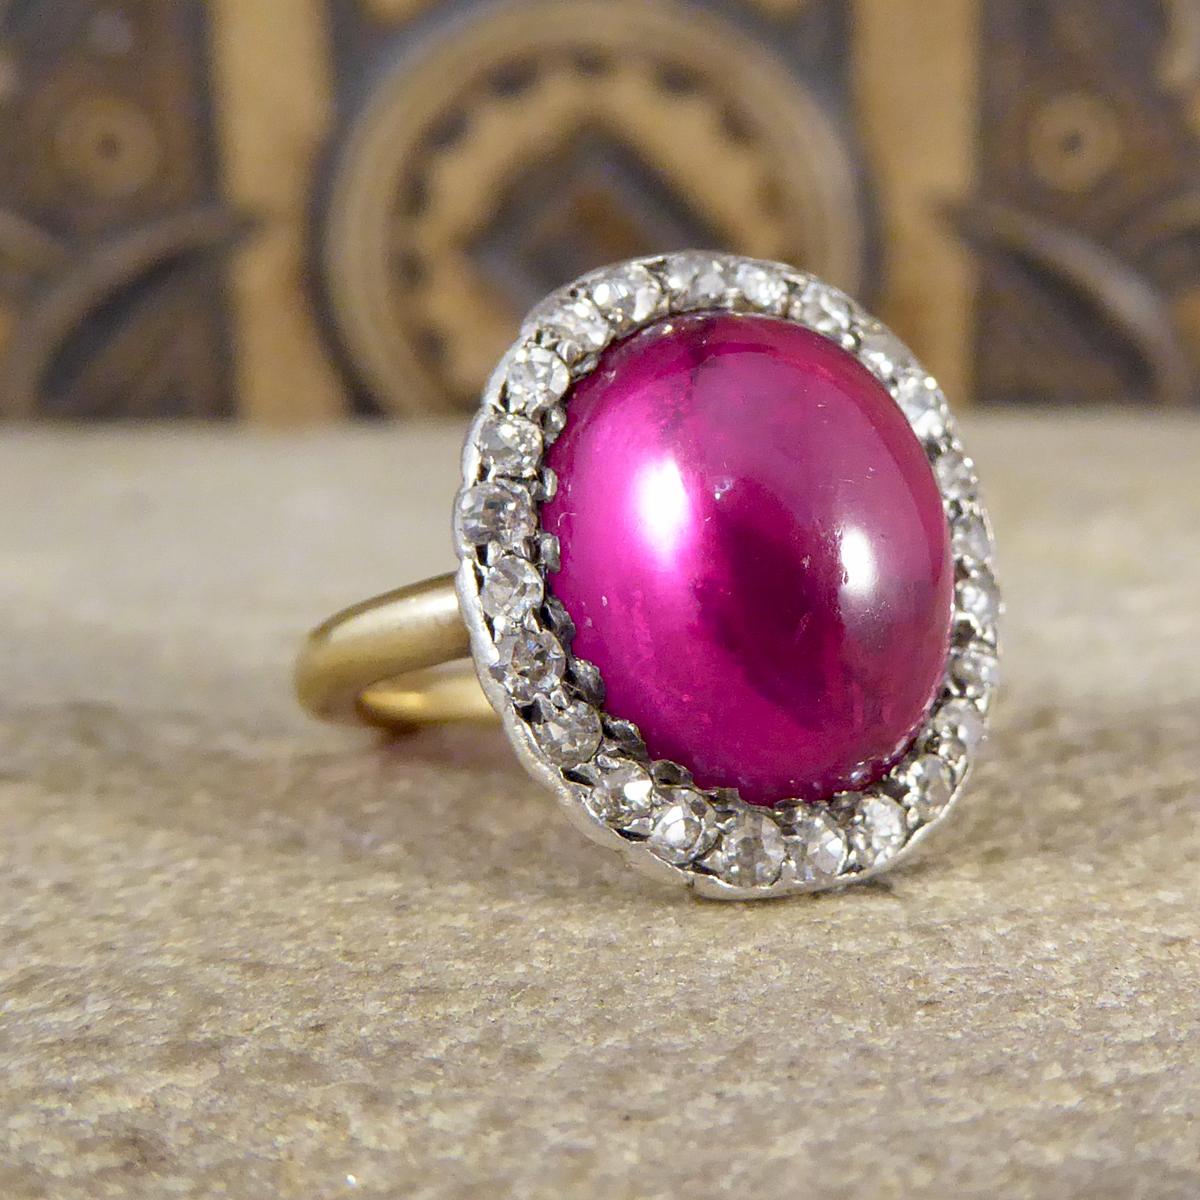 A classic Edwardian cluster ring, handmade with quality craftsmanship. It has been modelled in 18ct Yellow Gold and Silver with markings on the inner band (faded). The design features a Cabochon Crown Lab grown Ruby in the centre with a surround of